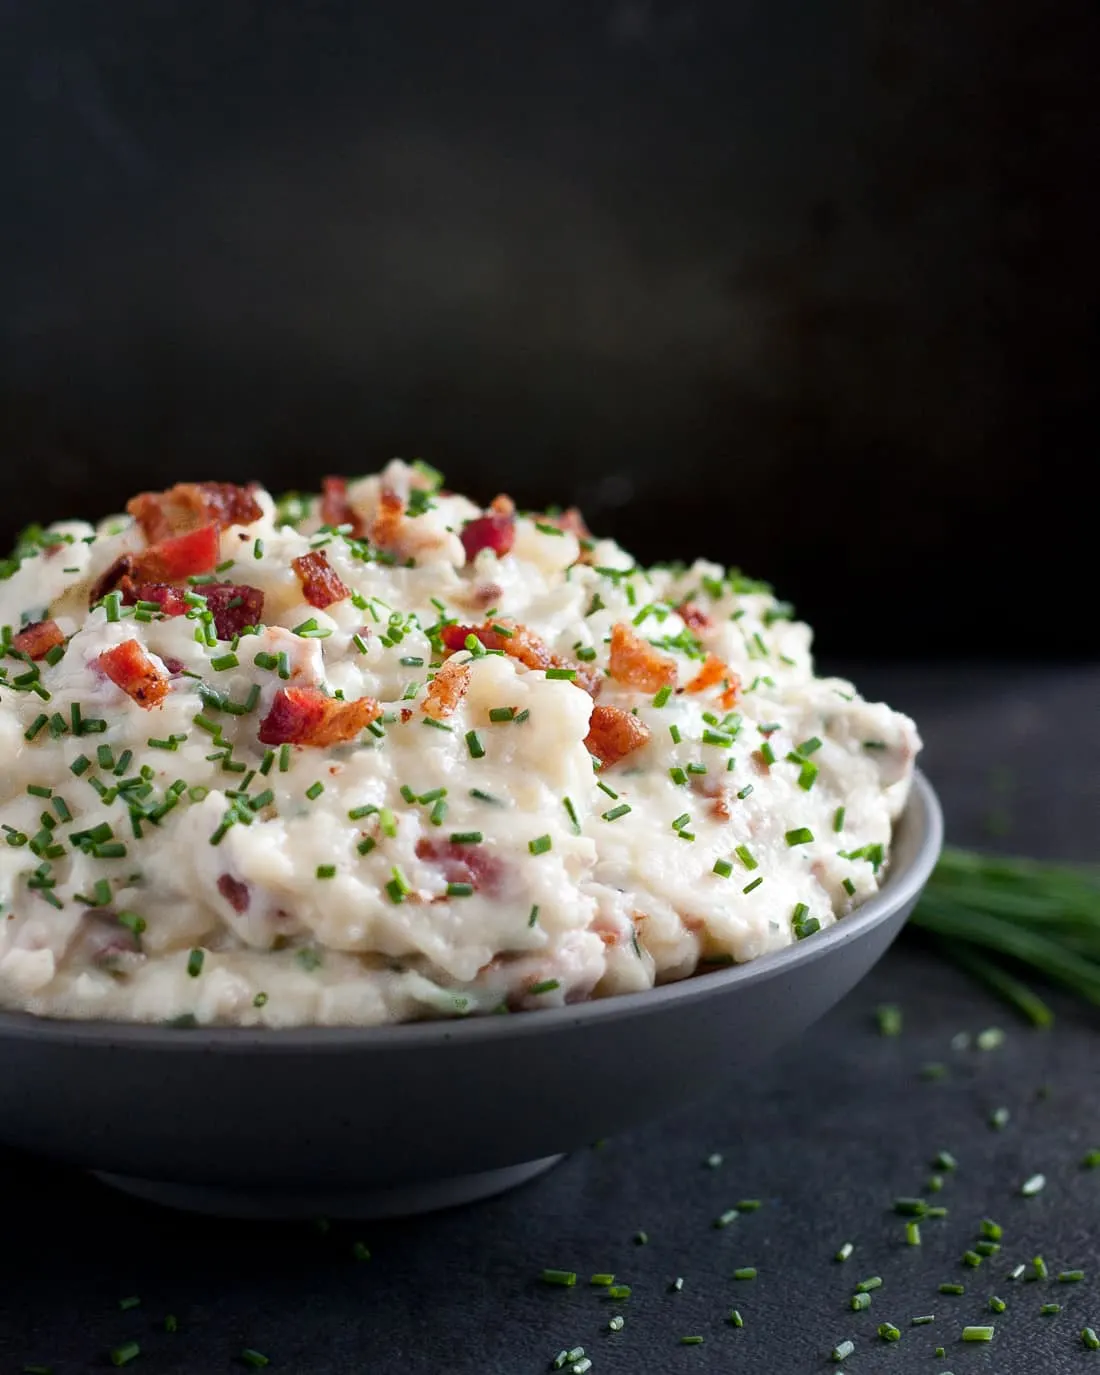 Bacon Brie Mashed Potatoes - Creamy, indulgent, totally loaded mashed potatoes. * Recipe on GoodieGodmother.com